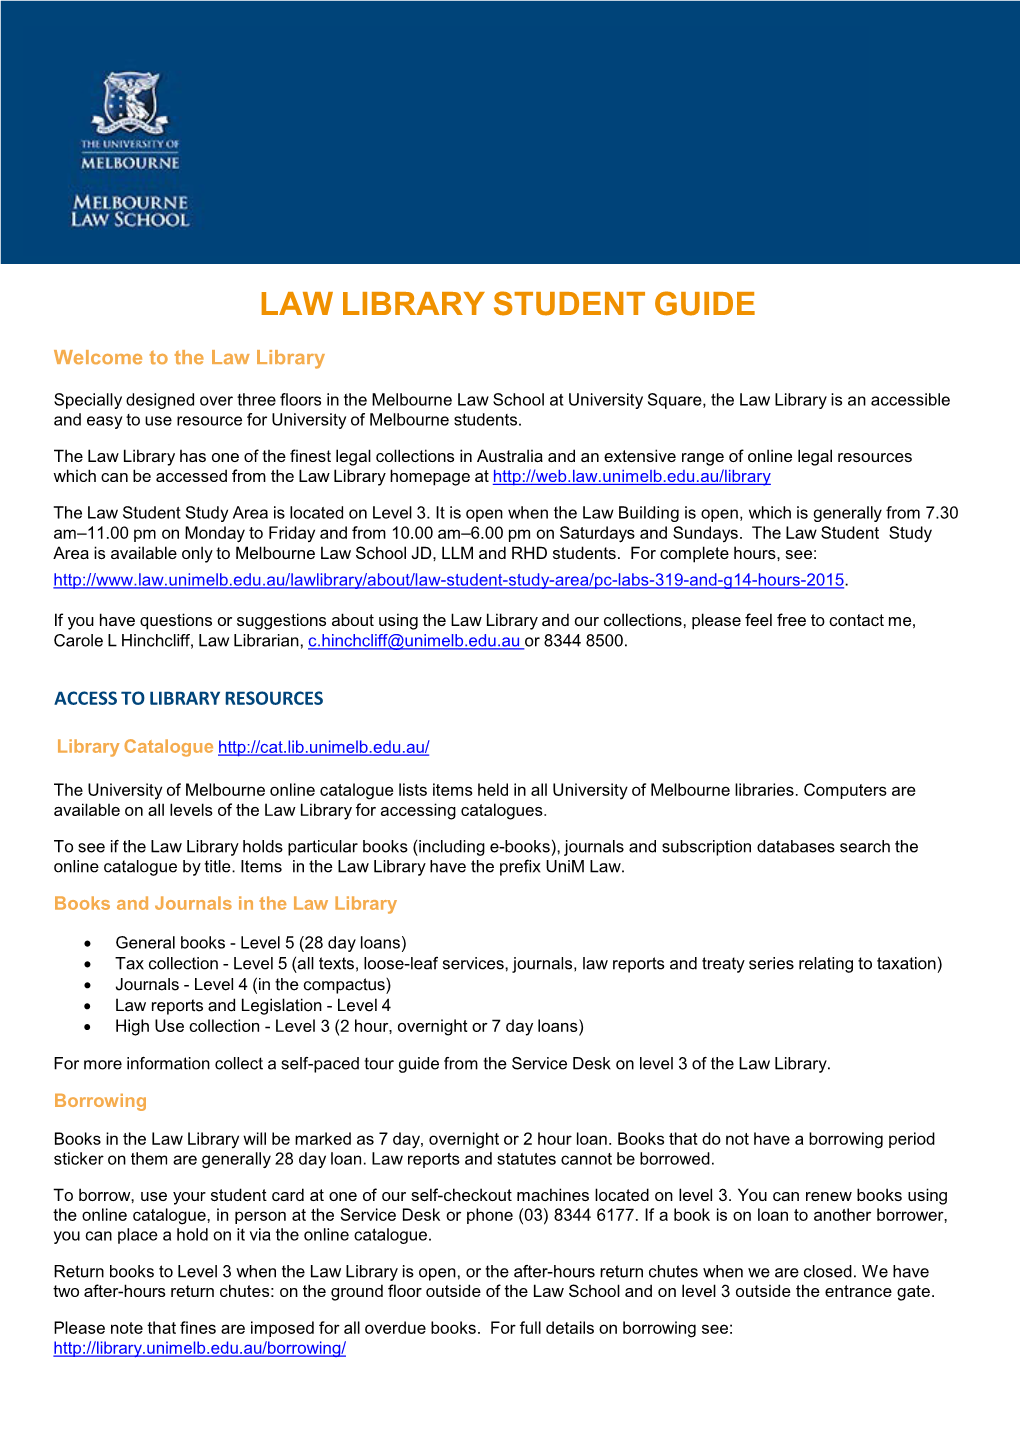 Law Library Student Guide